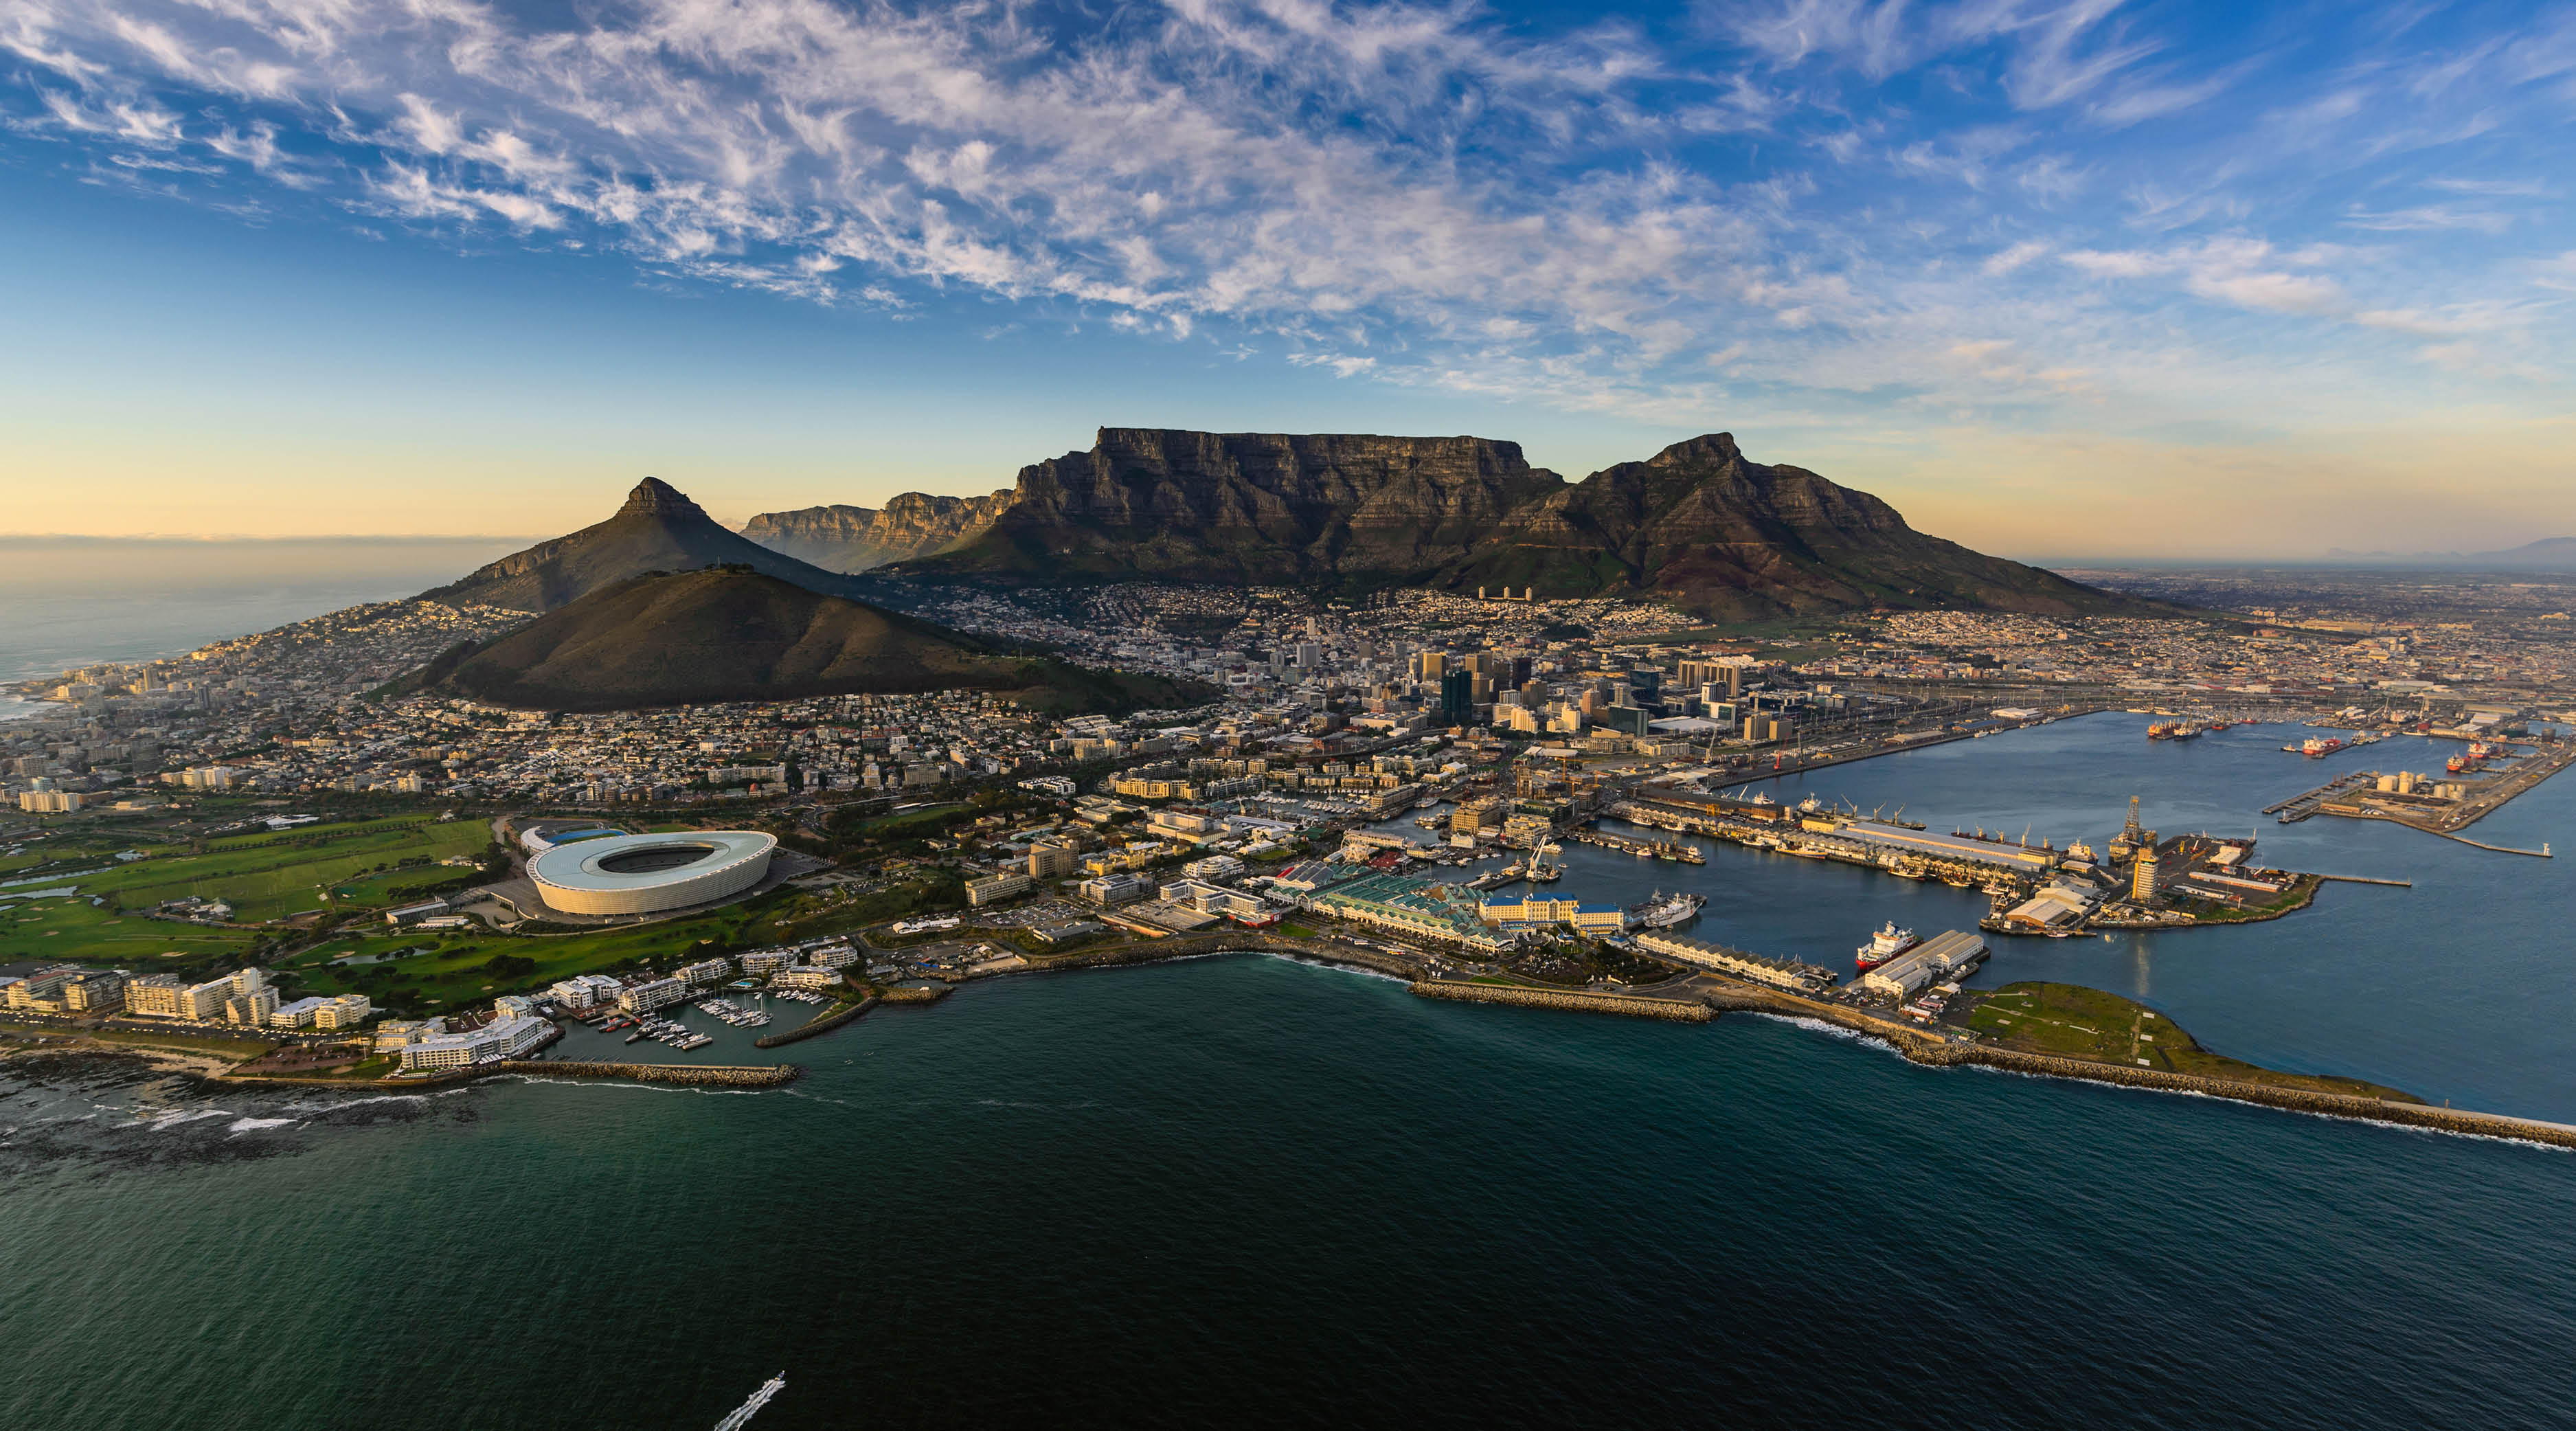 The ultimate South Africa holiday - Cape Town